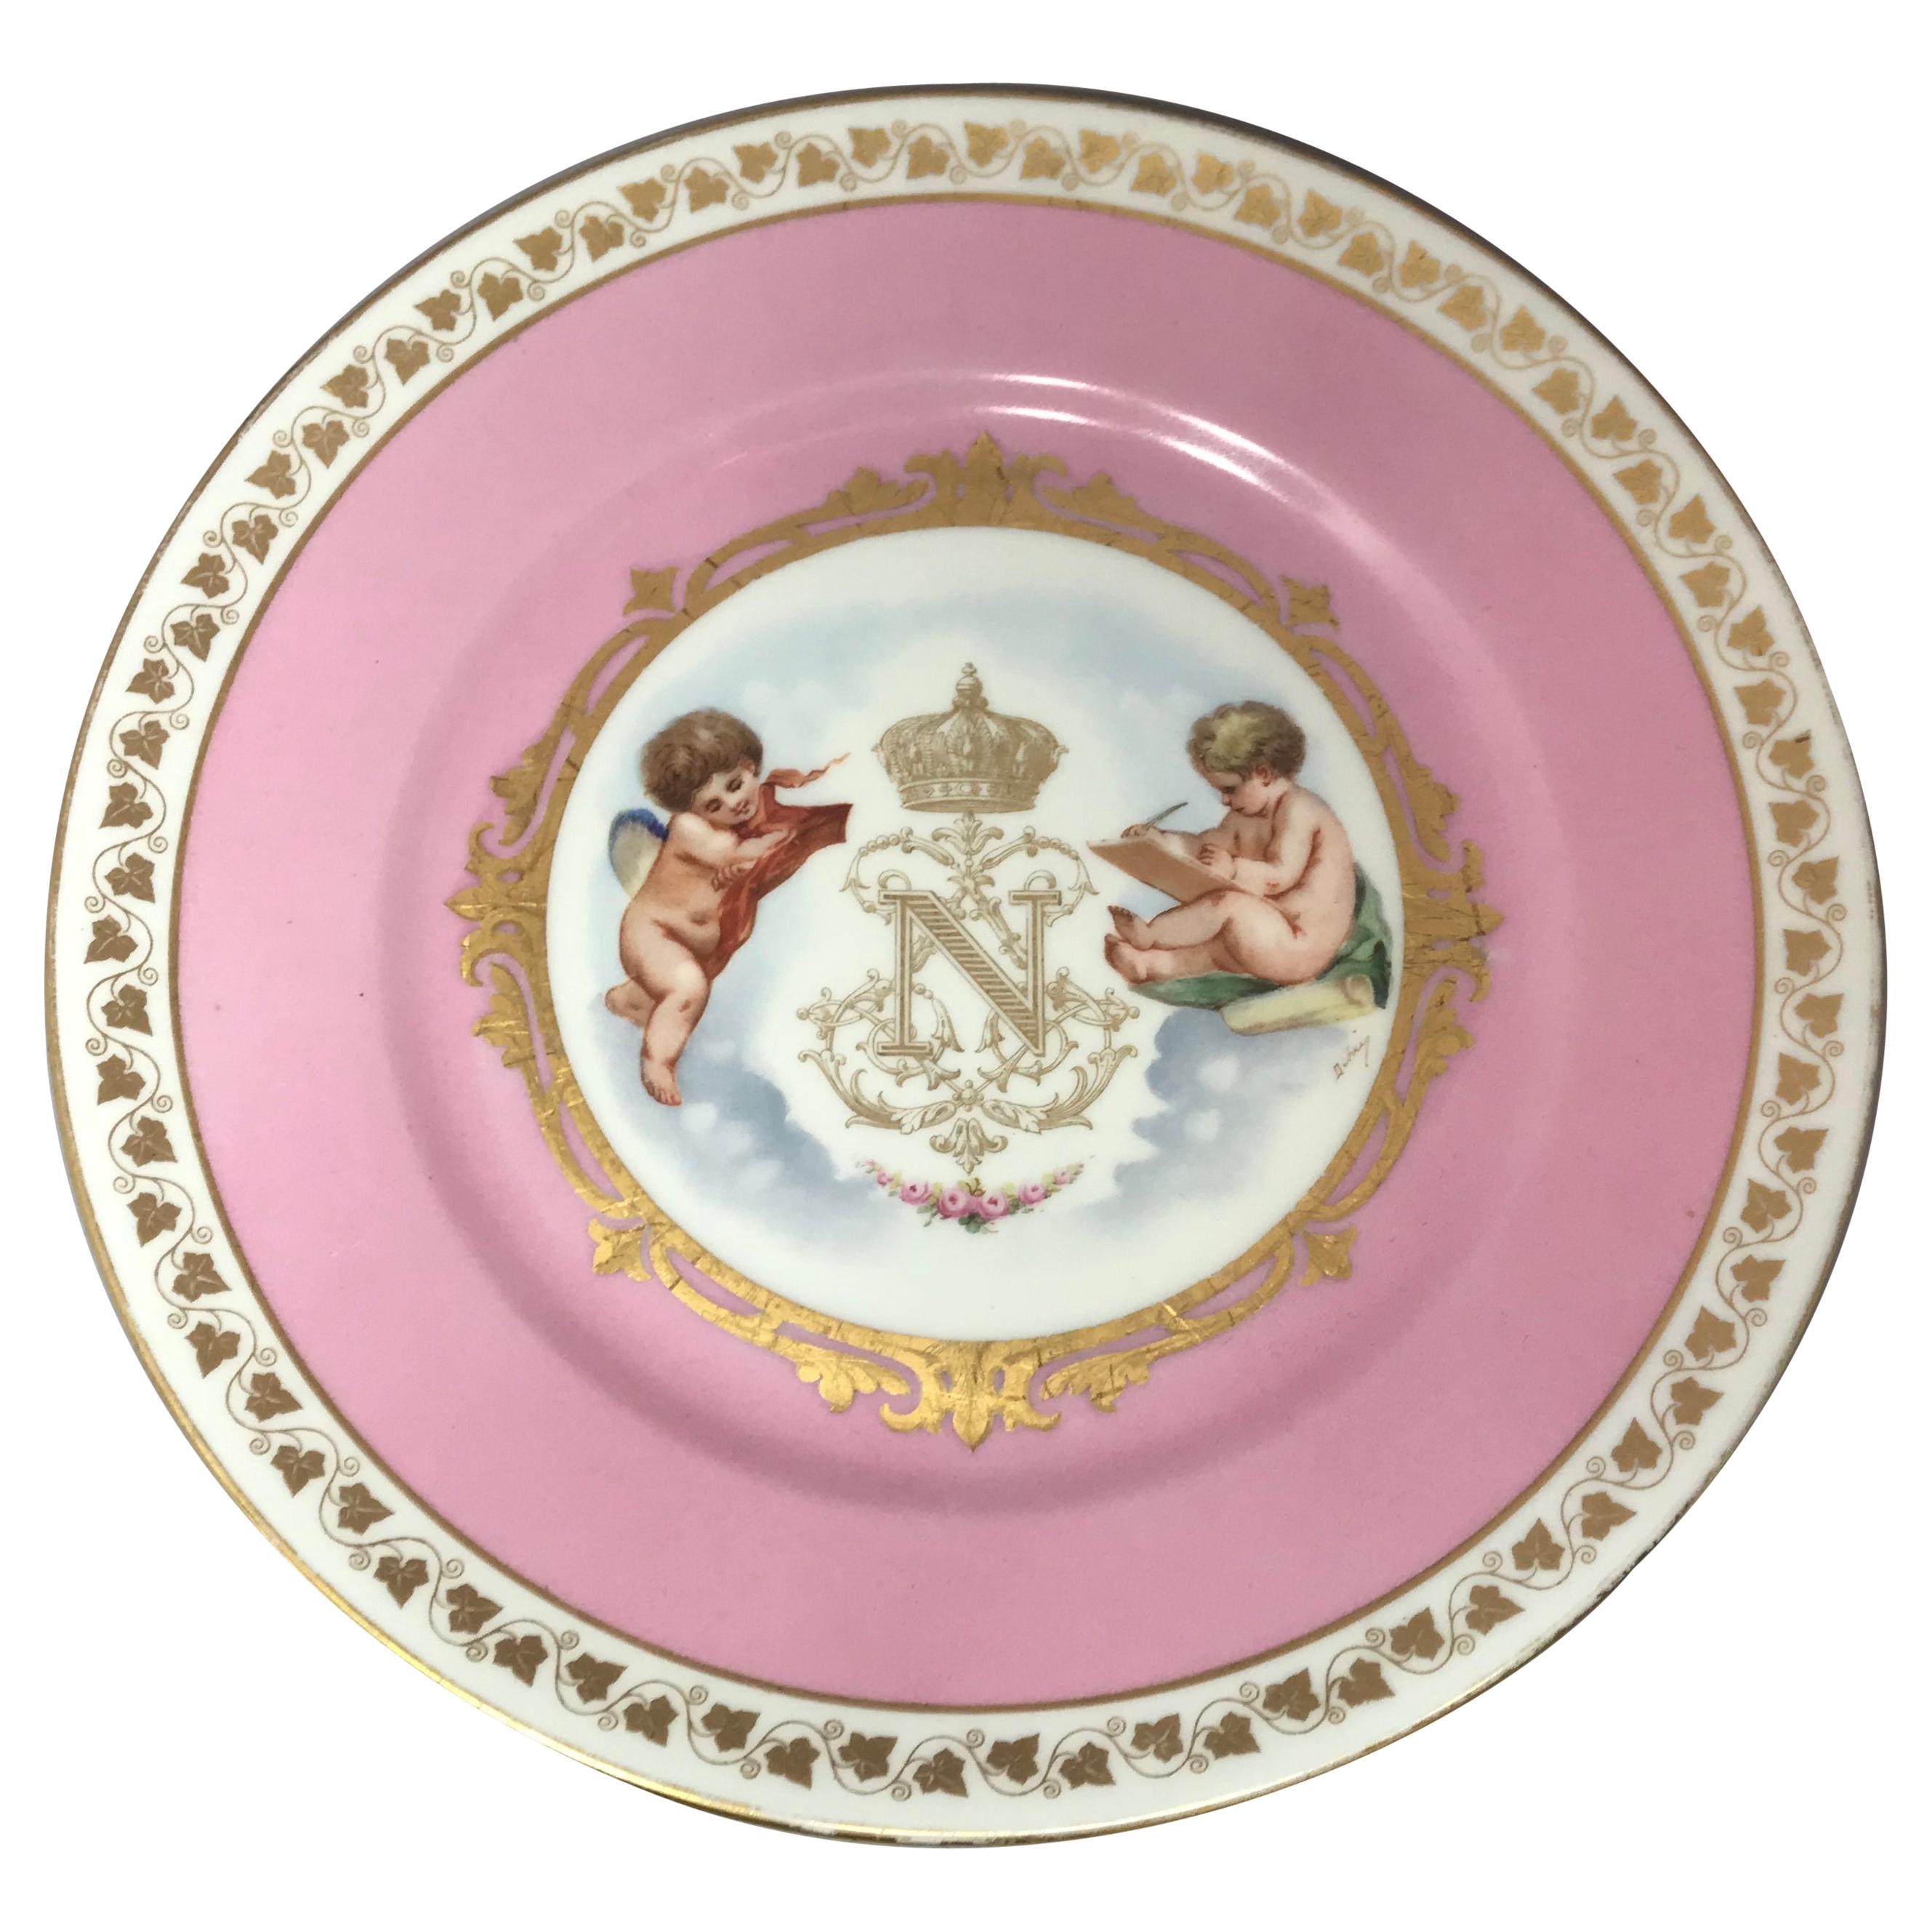 Sèvres Pink and Gilt Napoleon Plate